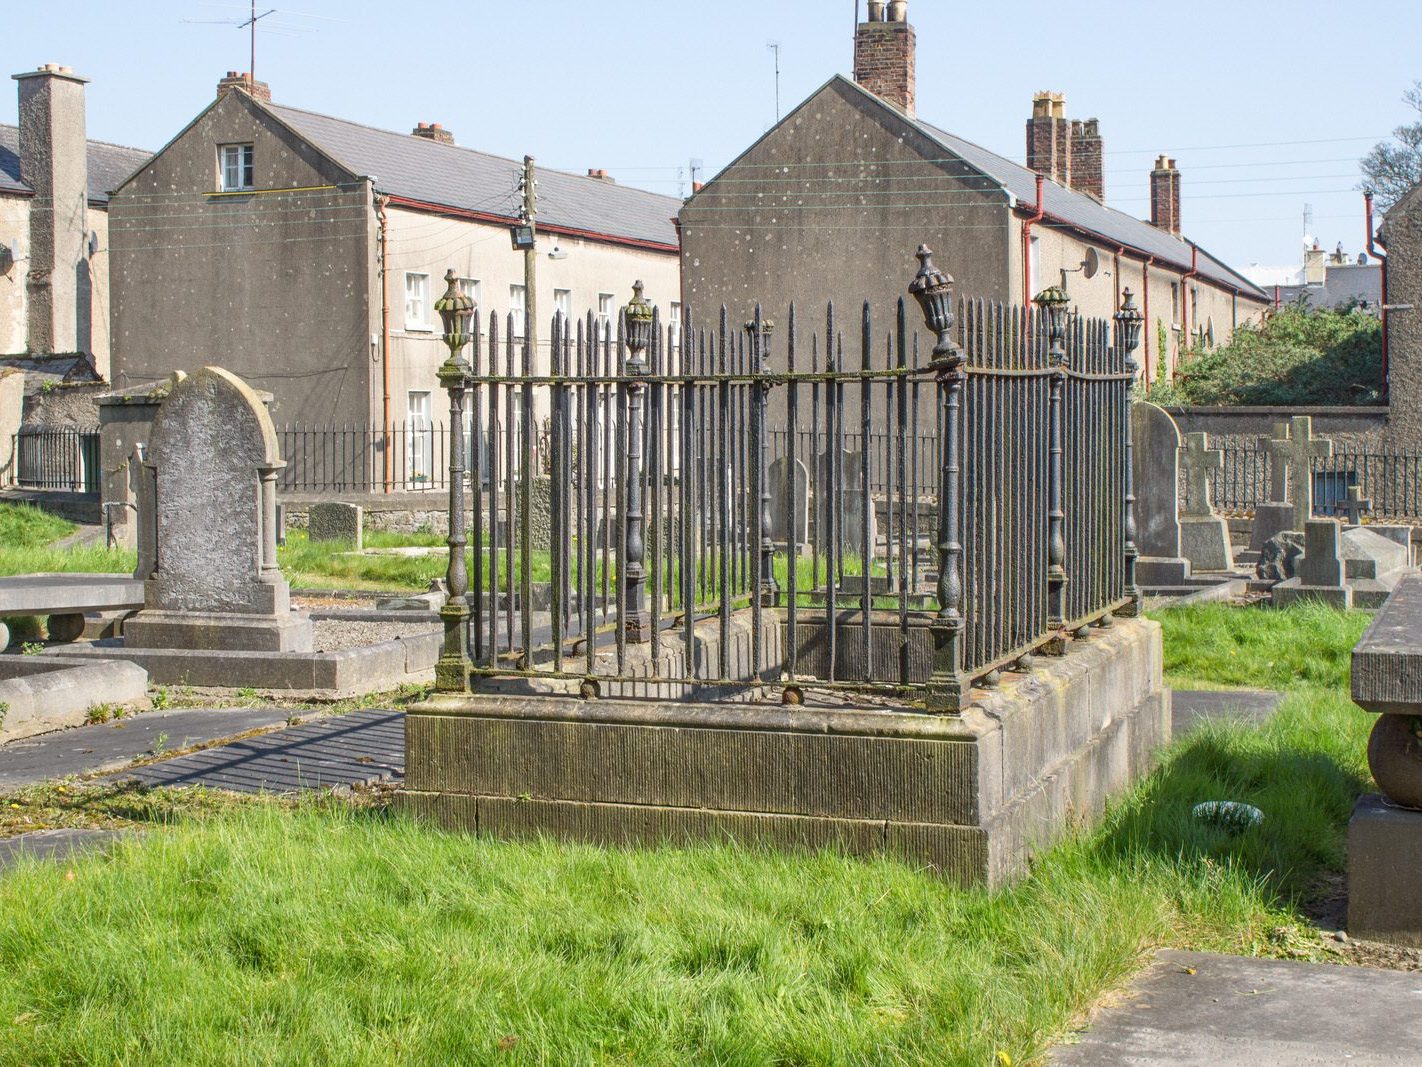 SOME OLD IMAGES OF ST PETERS CHURCHYARD IN DROGHEDA [PHOTOGRAPHED 20212]-224214-1